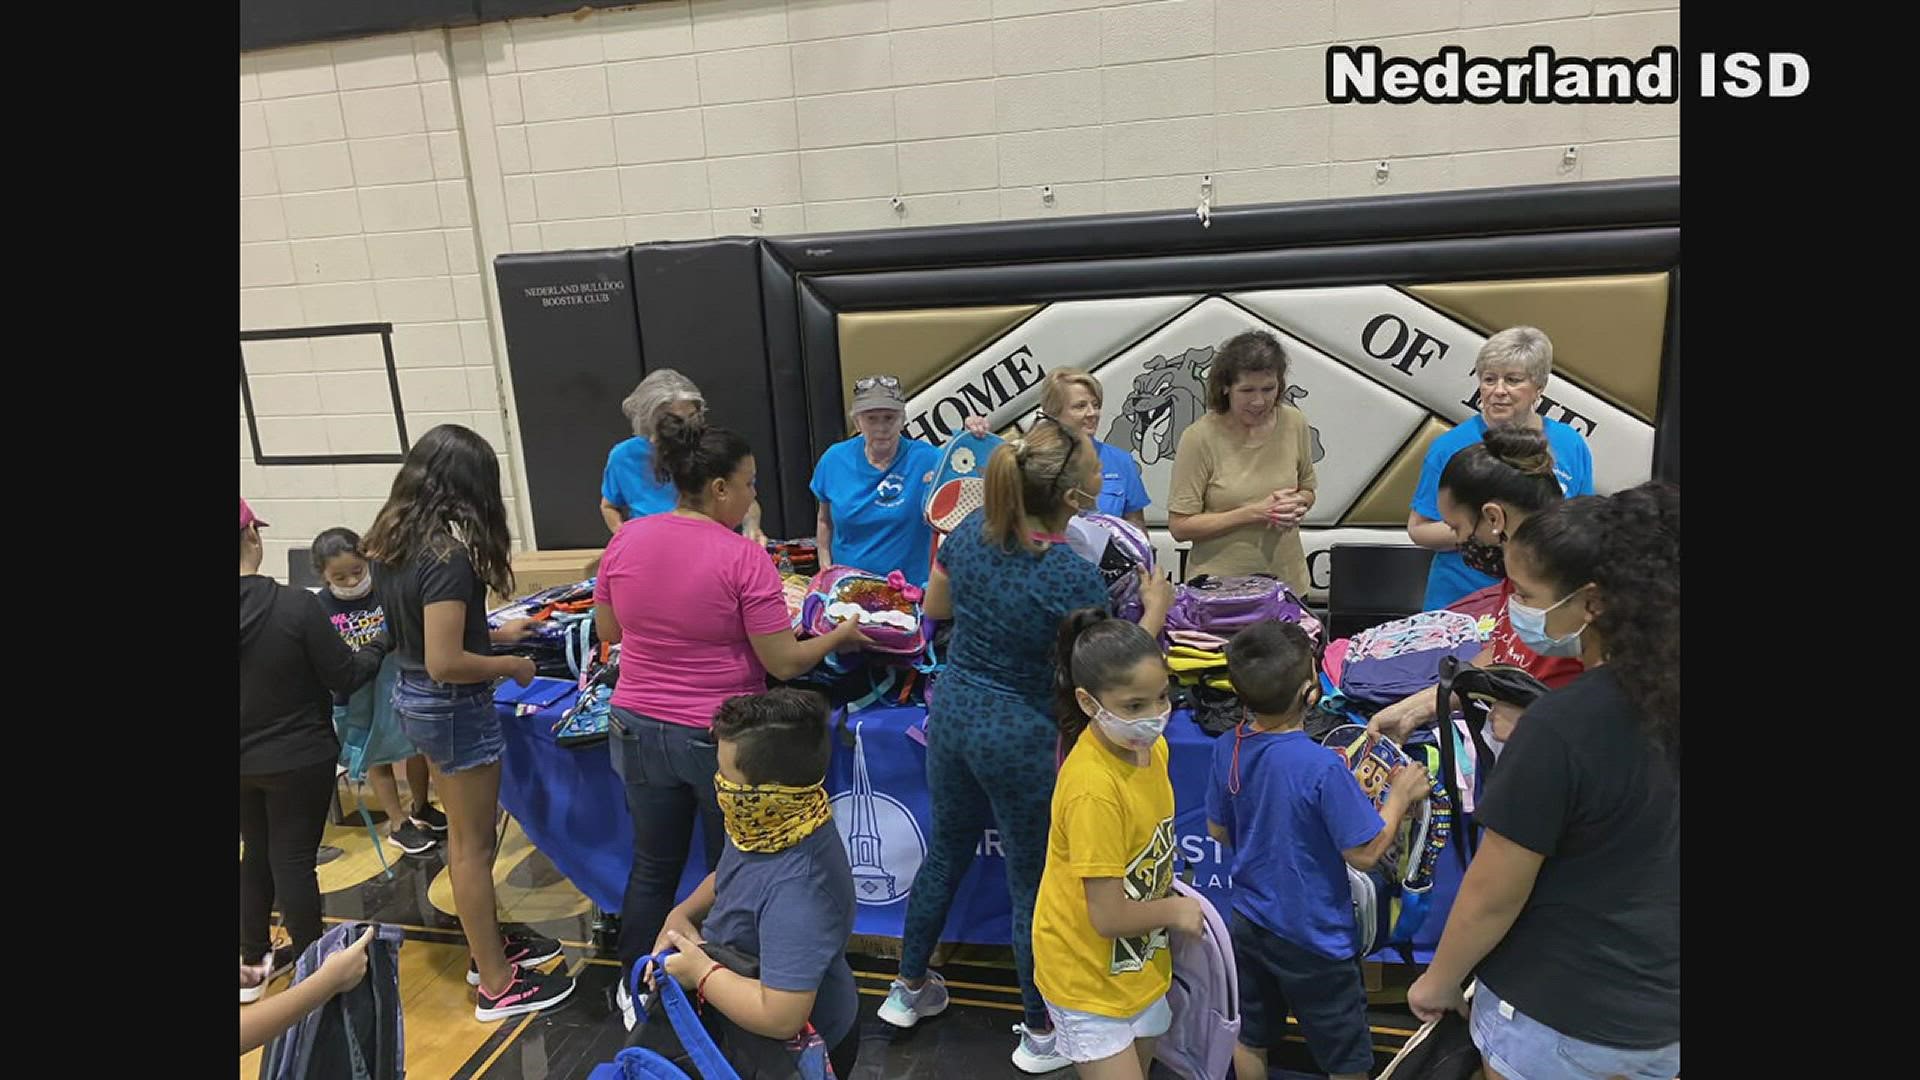 The fair will be held Wednesday morning at the Nederland High School gym.